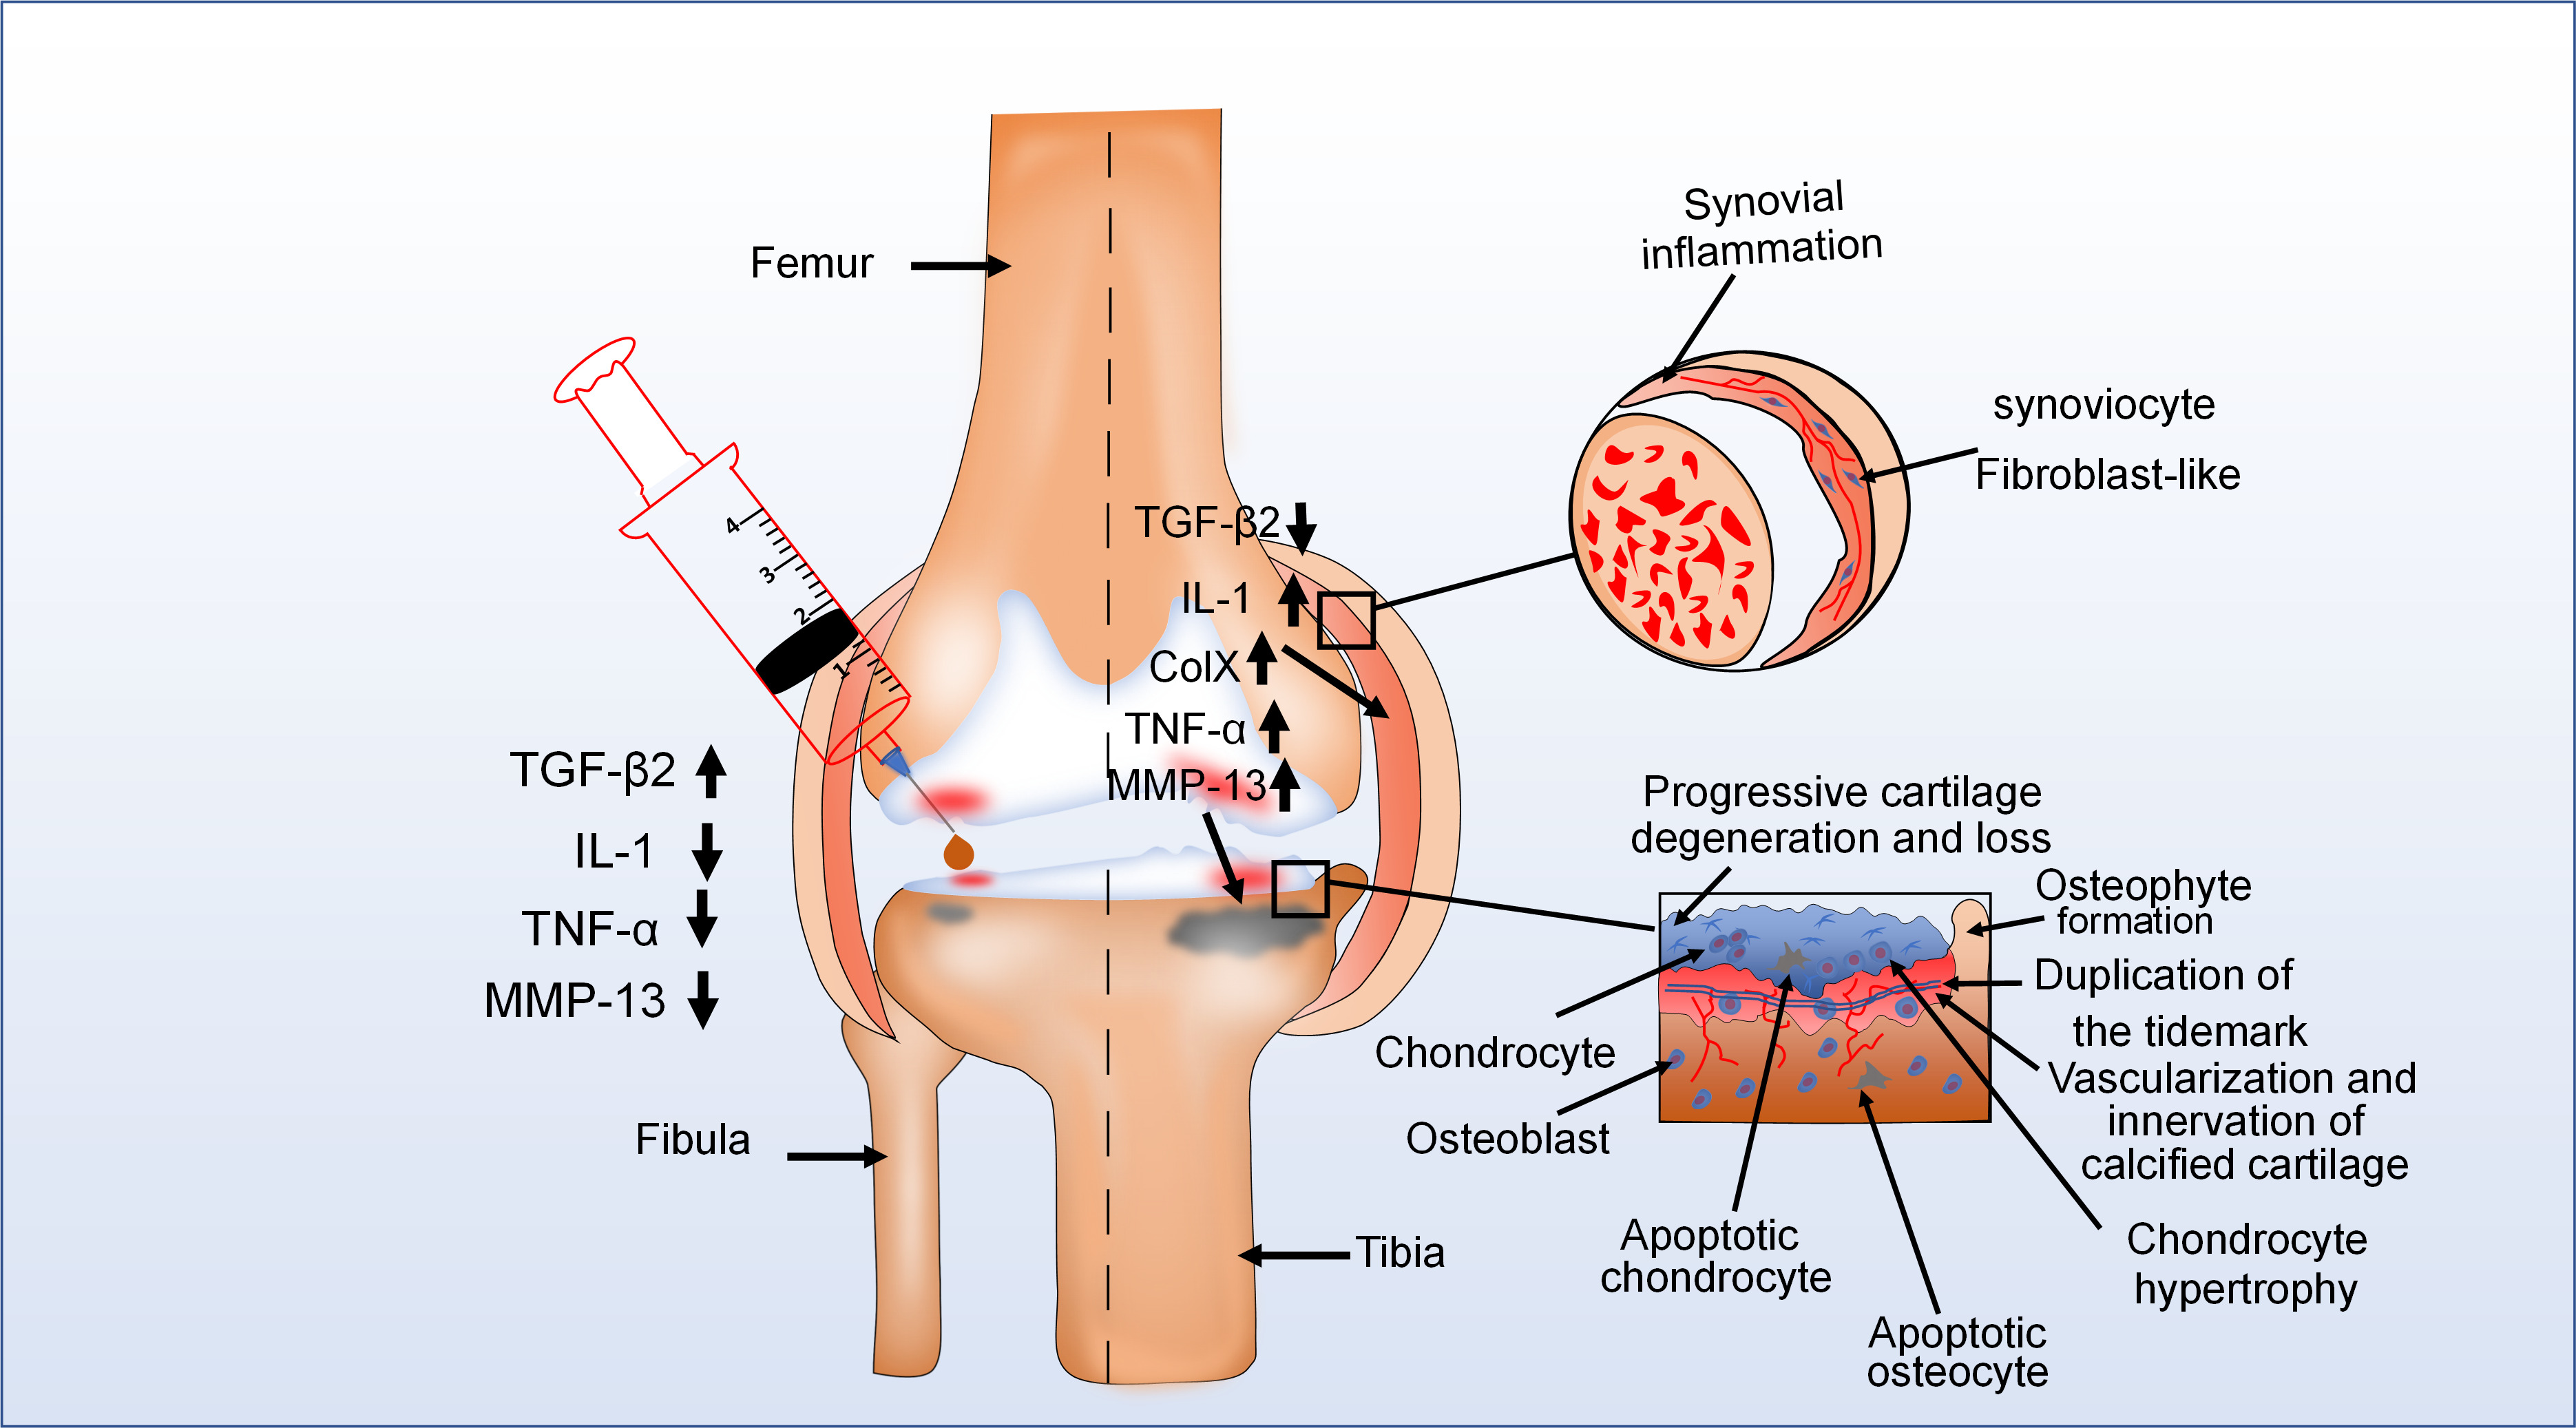 Fig. 4 
            The pathological change of knee joint in the osteochondral unit during the evolution of osteoarthritis (OA). OA is typically characterized by cartilage damage, osteophyte formation, and thickening of the joint capsule. For example, in one diagram (upper right), the epithelial lining of the joint capsule is thickened because of synovial inflammation. In another (bottom right), during advanced stages of OA, there are pathological changes in different areas of articular cartilage. Moreover, in the left diagram, injection of transforming growth factor-beta 2 (TGF-β2) into the joint cavity of patients with OA reduced the expression of some proinflammatory factors and the clinical symptoms of OA. This means that TGF-β2 plays an important role in the development of OA. ColX, collagen type X; IL-1, interleukin 1; MMP, matrix metalloproteinase; TNF-α, tumour necrosis factor alpha.
          